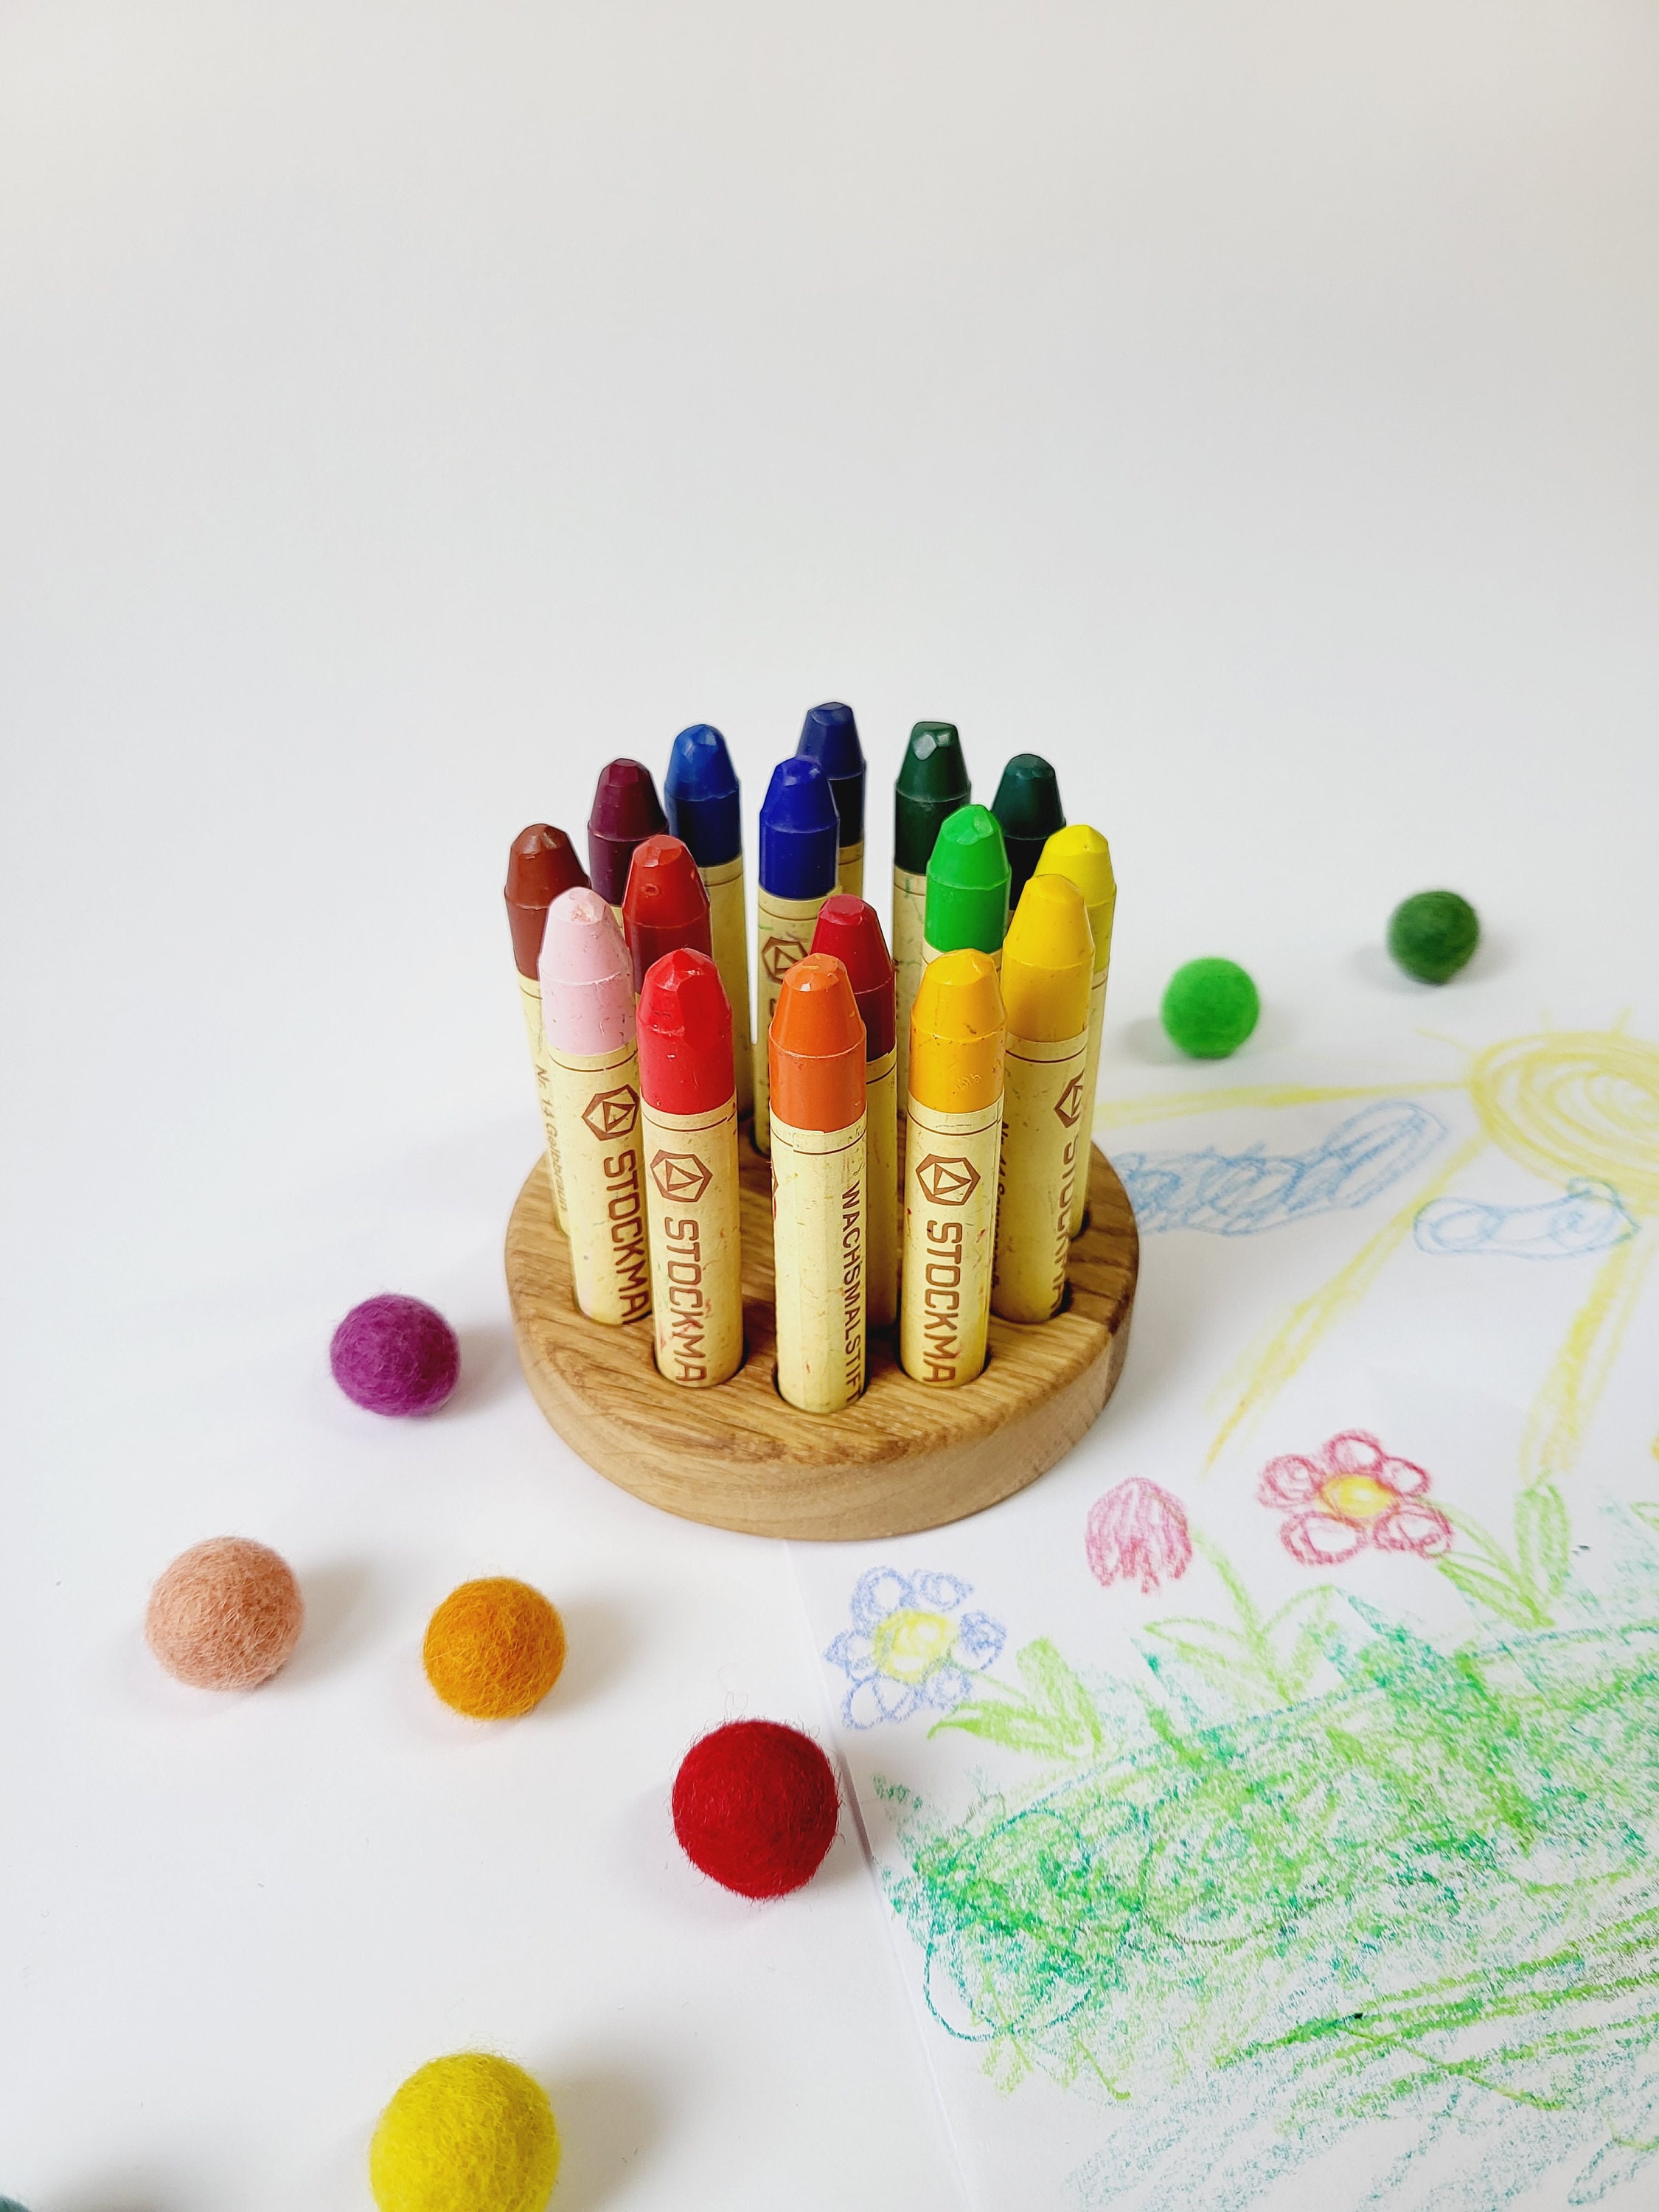 Wooden Beeswax Crayon Holder